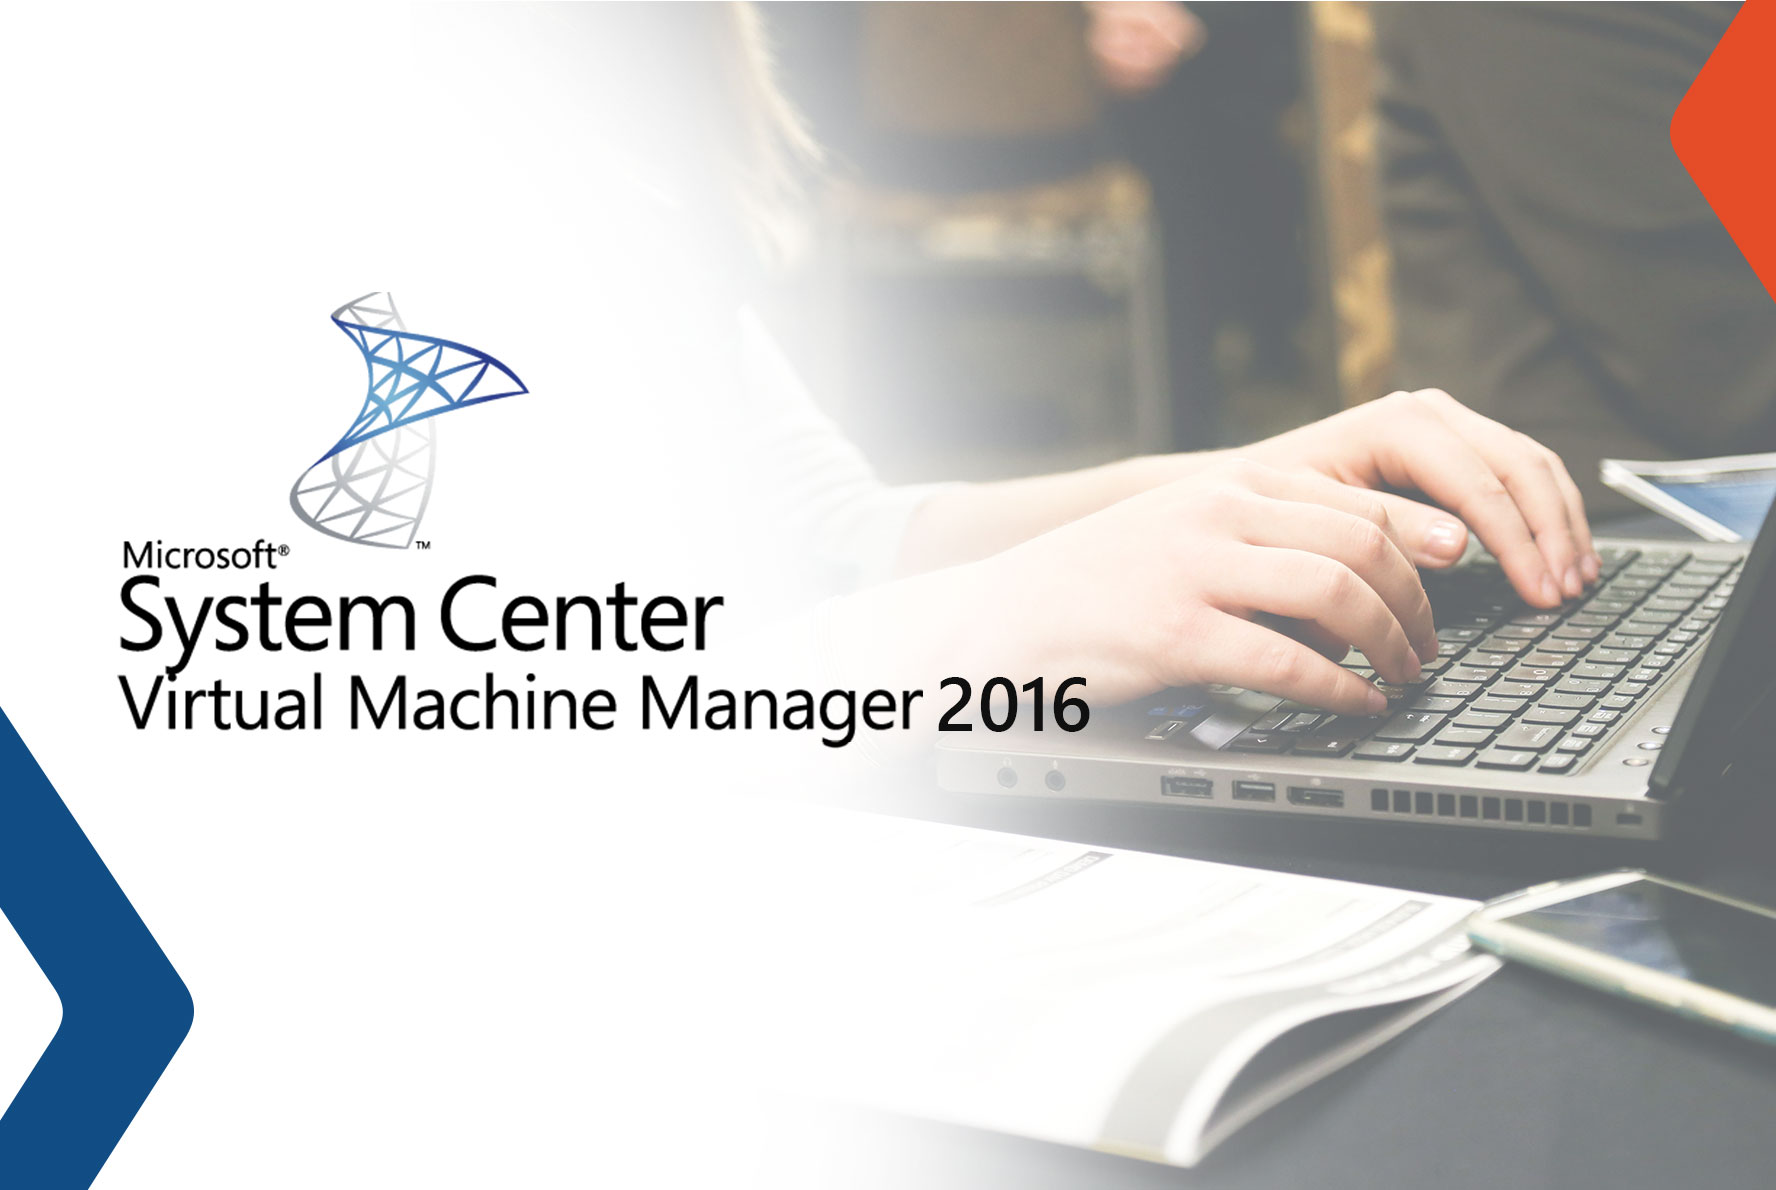 Implementing a Software-Defined DataCenter Using System Center Virtual Machine Manager